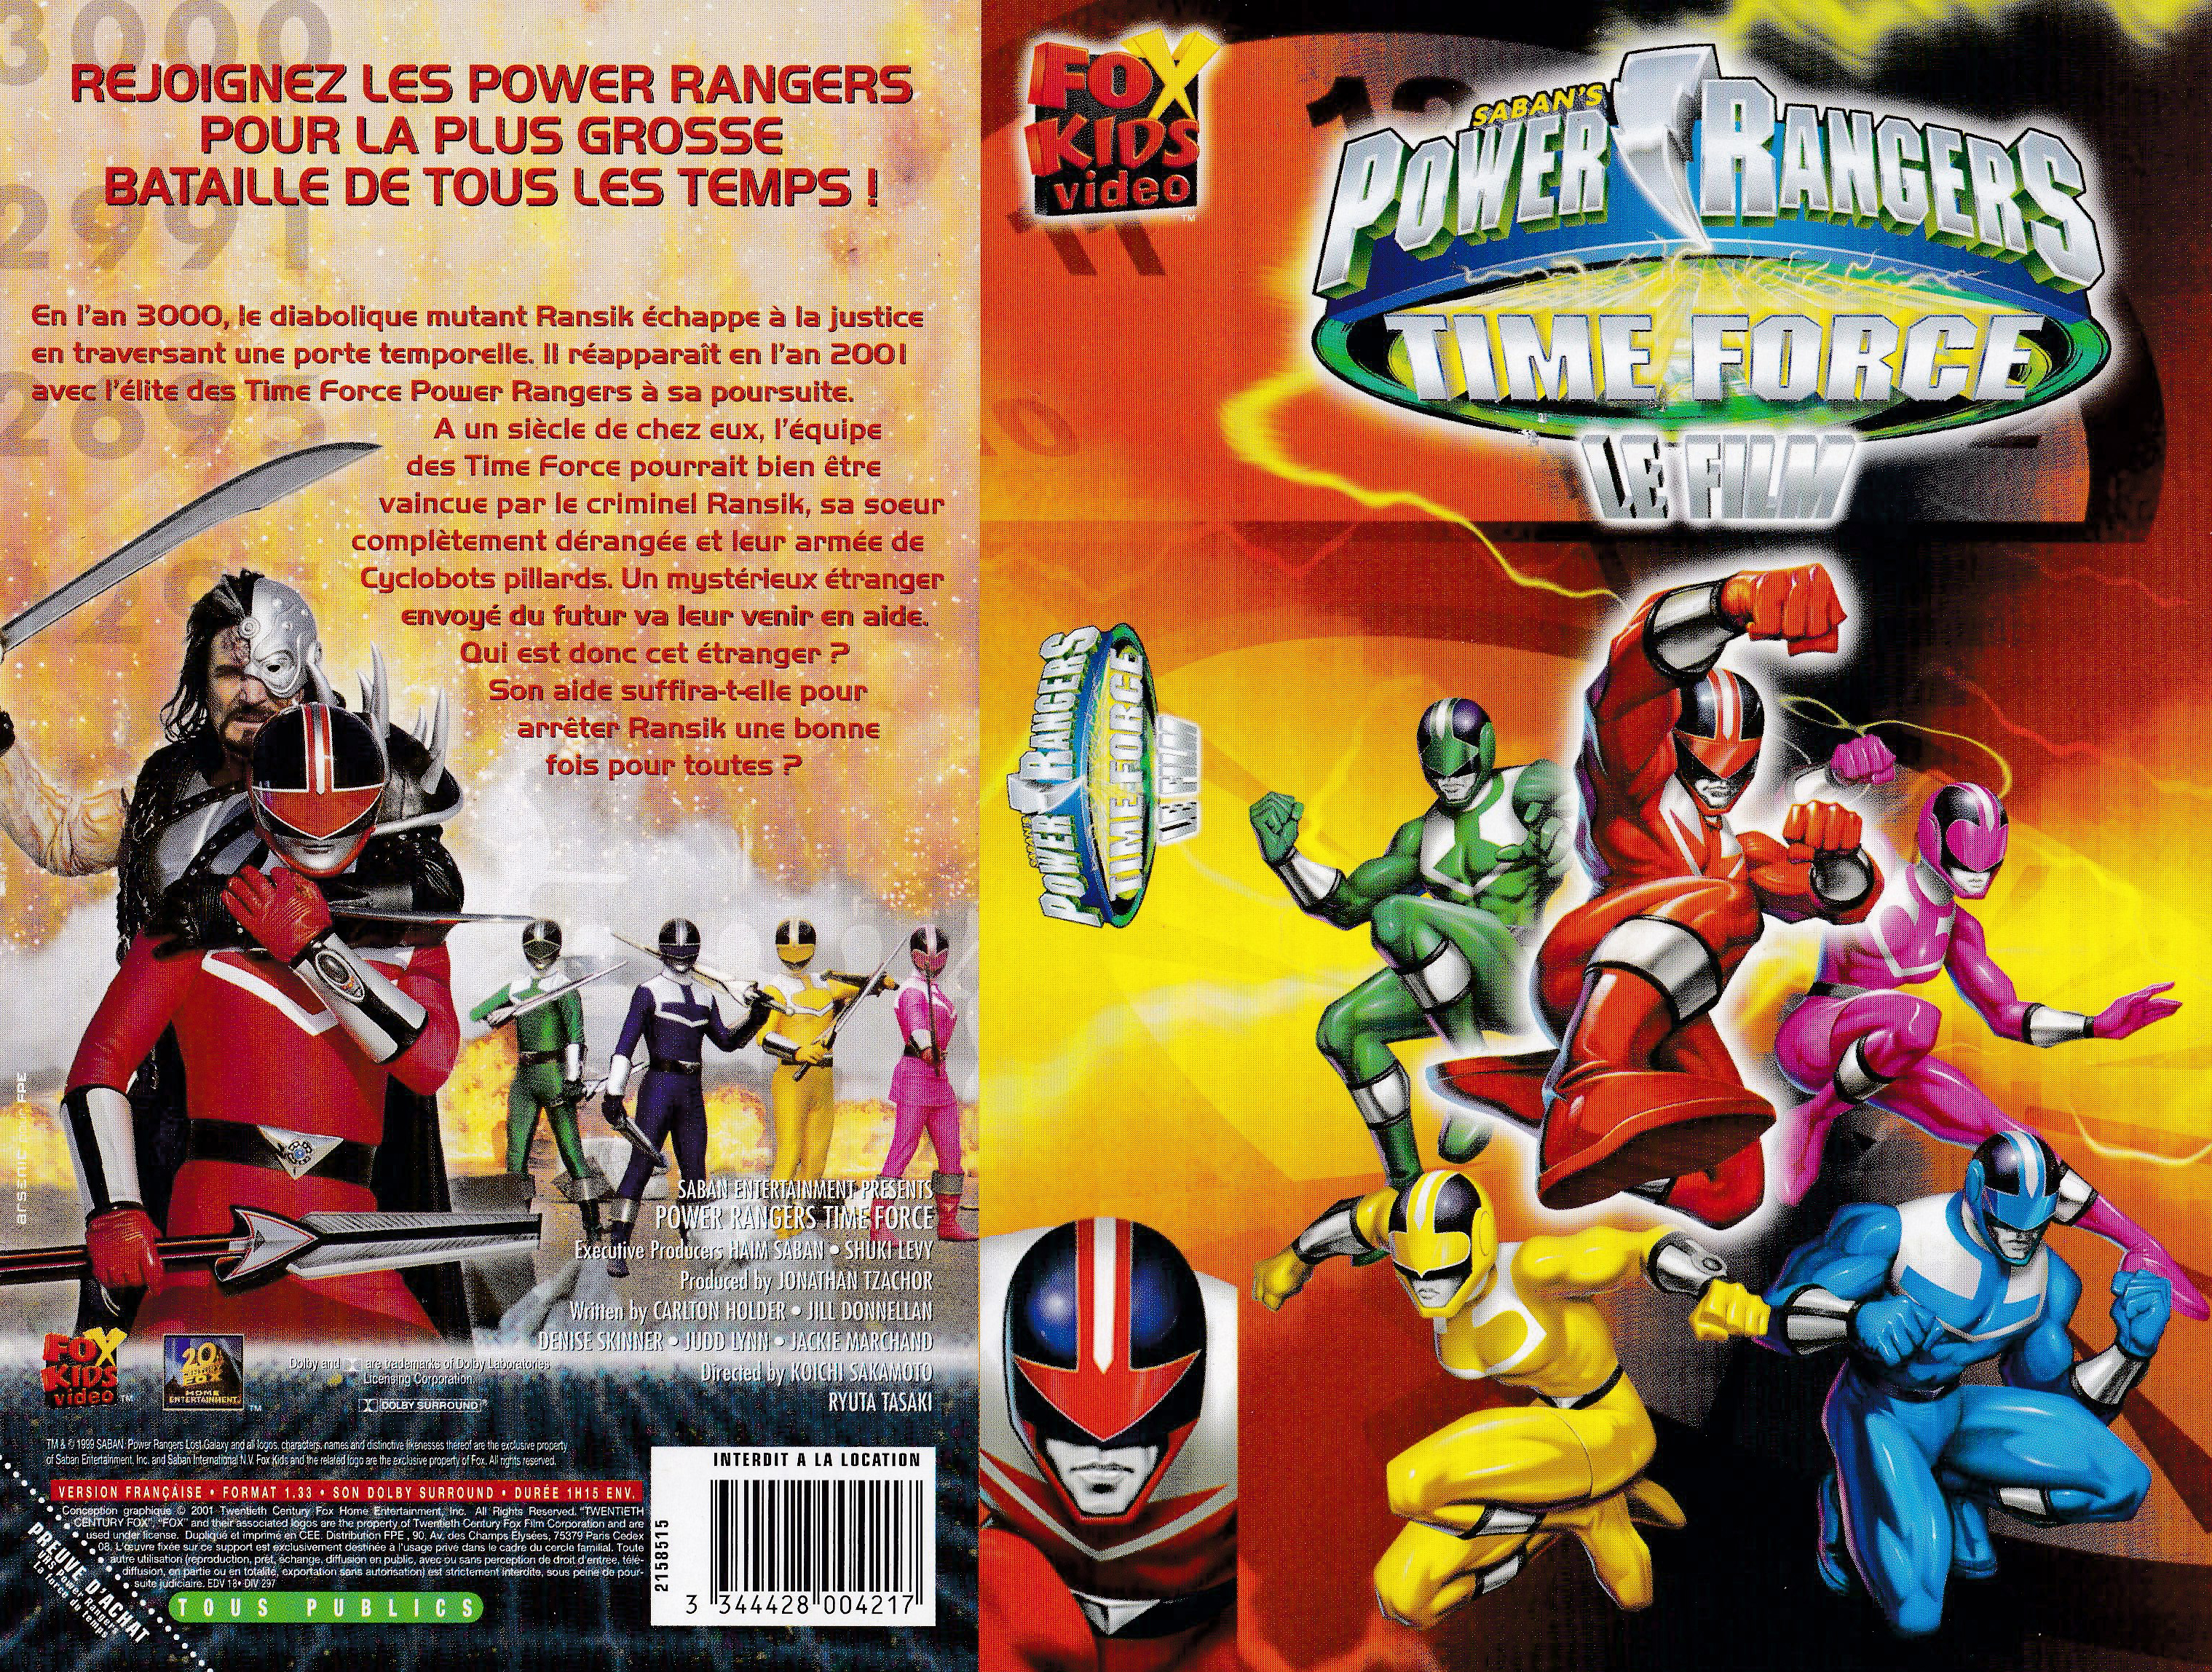 Power Rangers Time Force Le Film